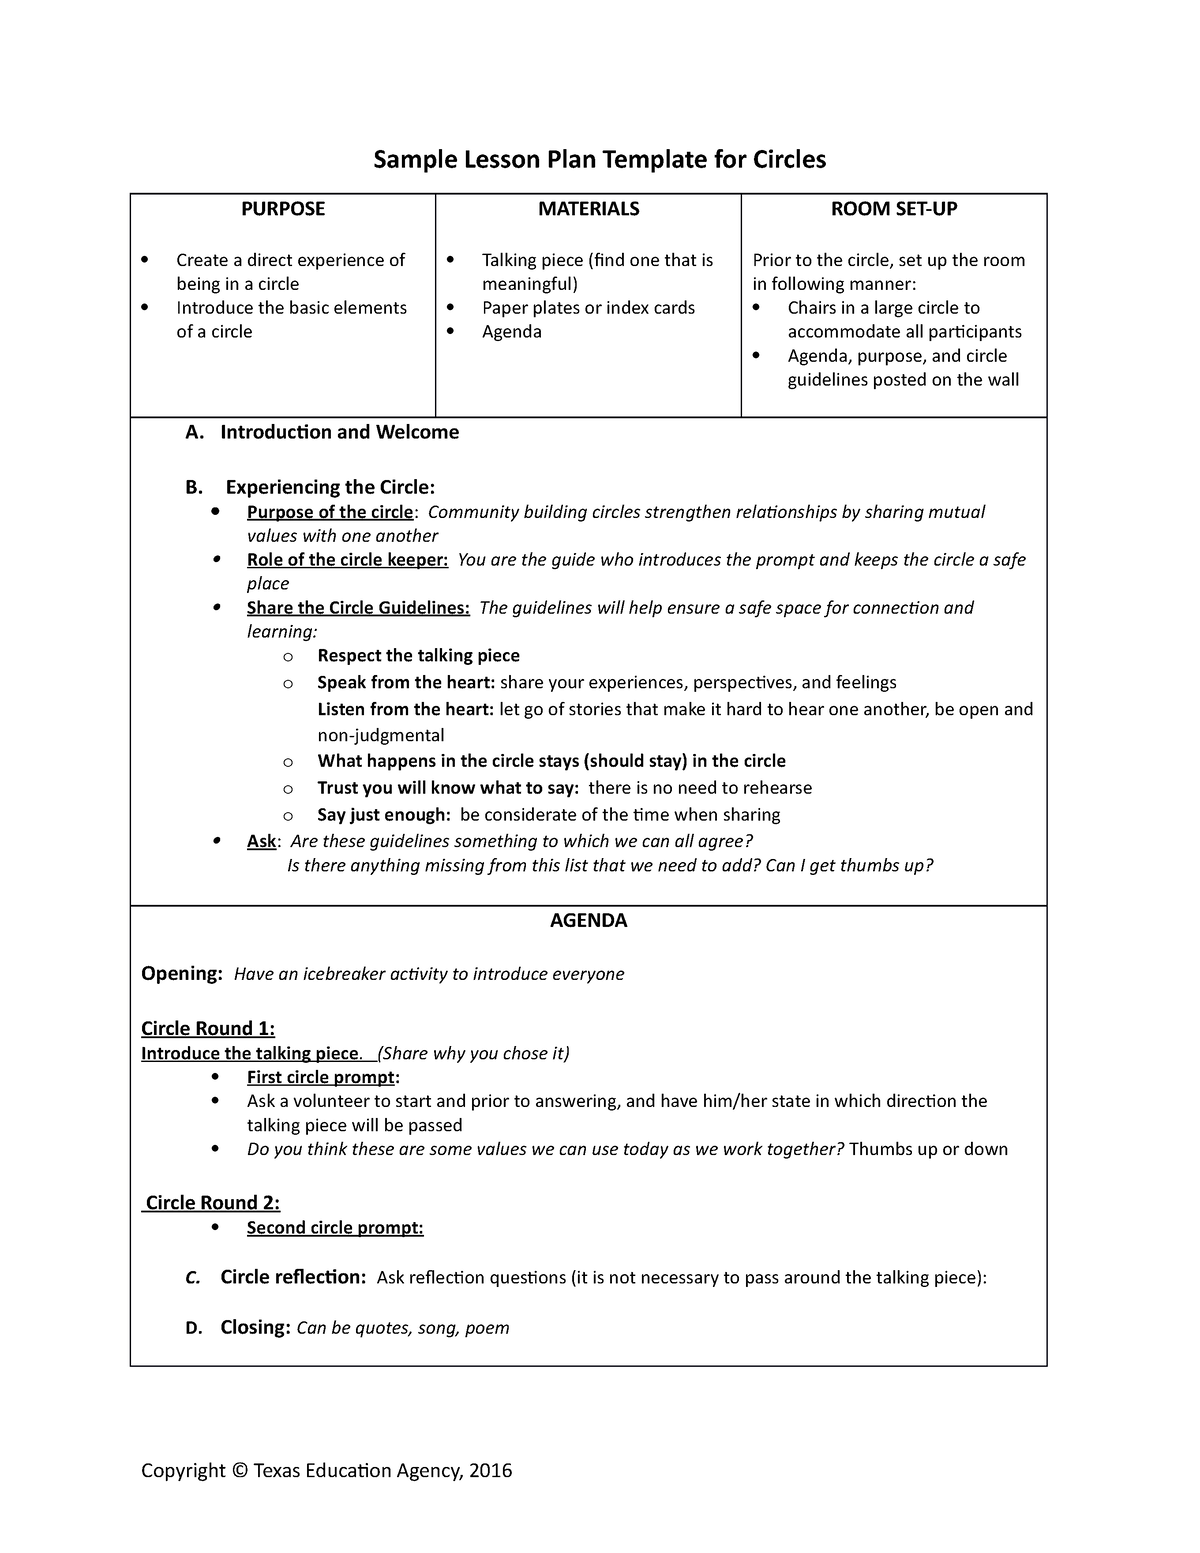 sample-lesson-plan-for-circles-template-0-sample-lesson-plan-template